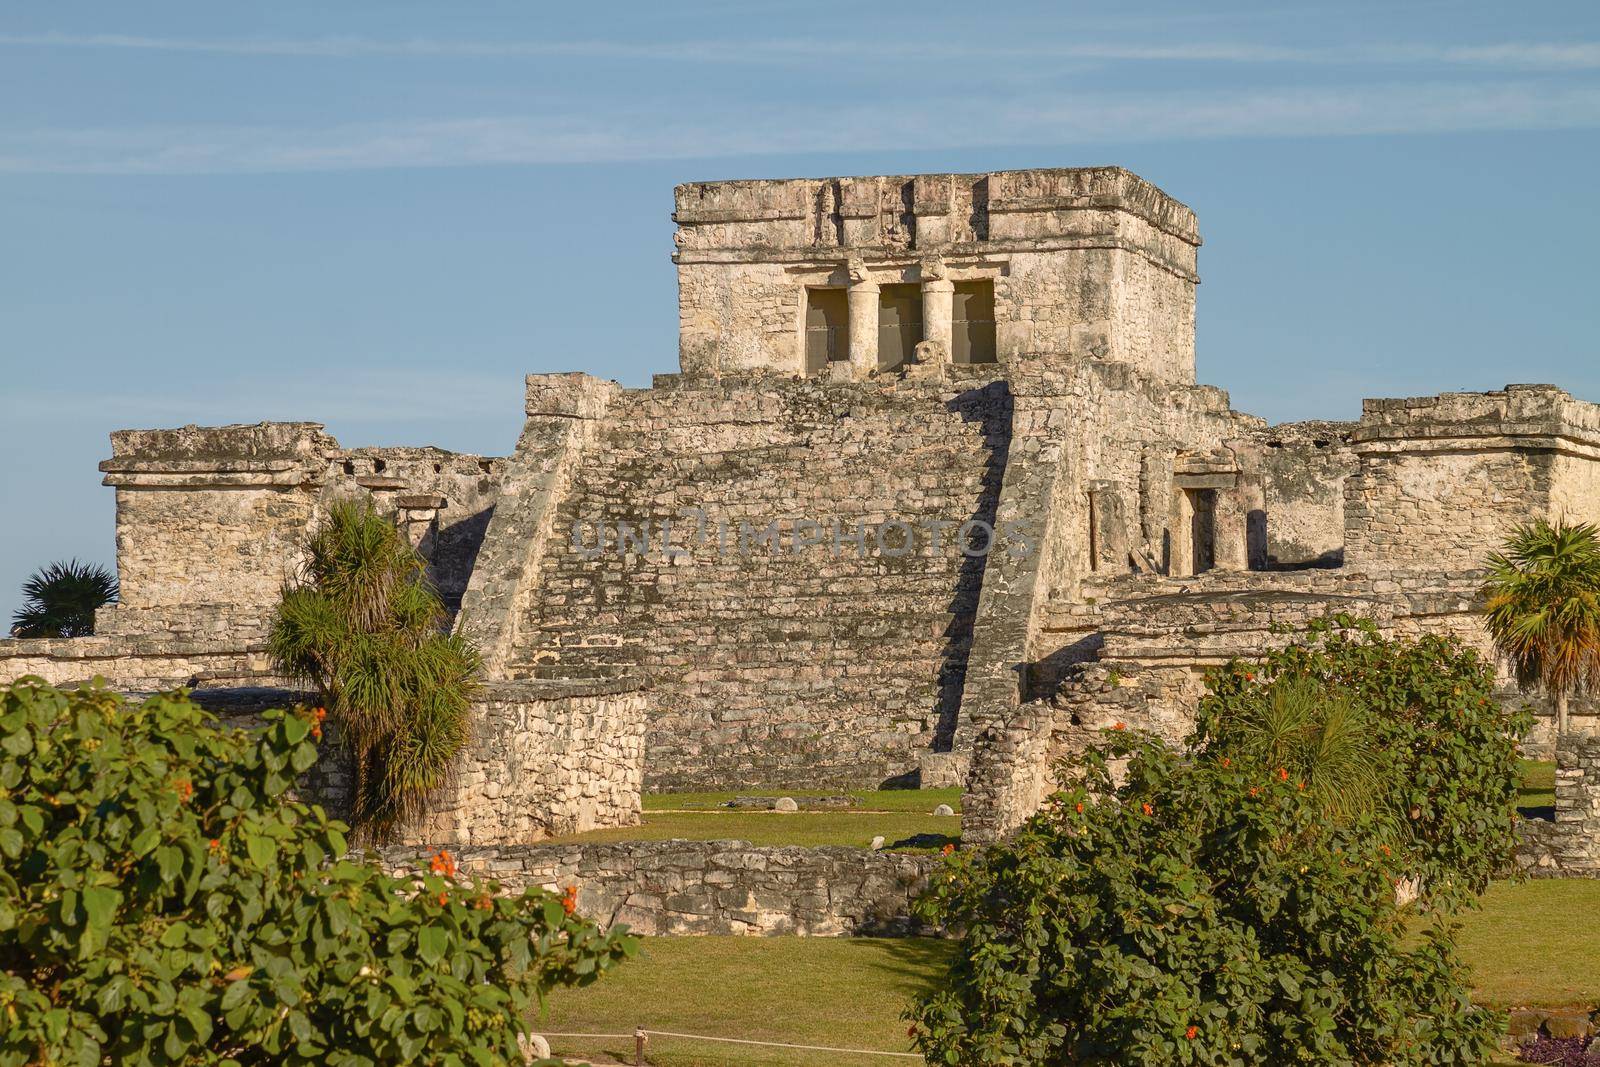 Mayan Ruins of Temple in Tulum Mexico.